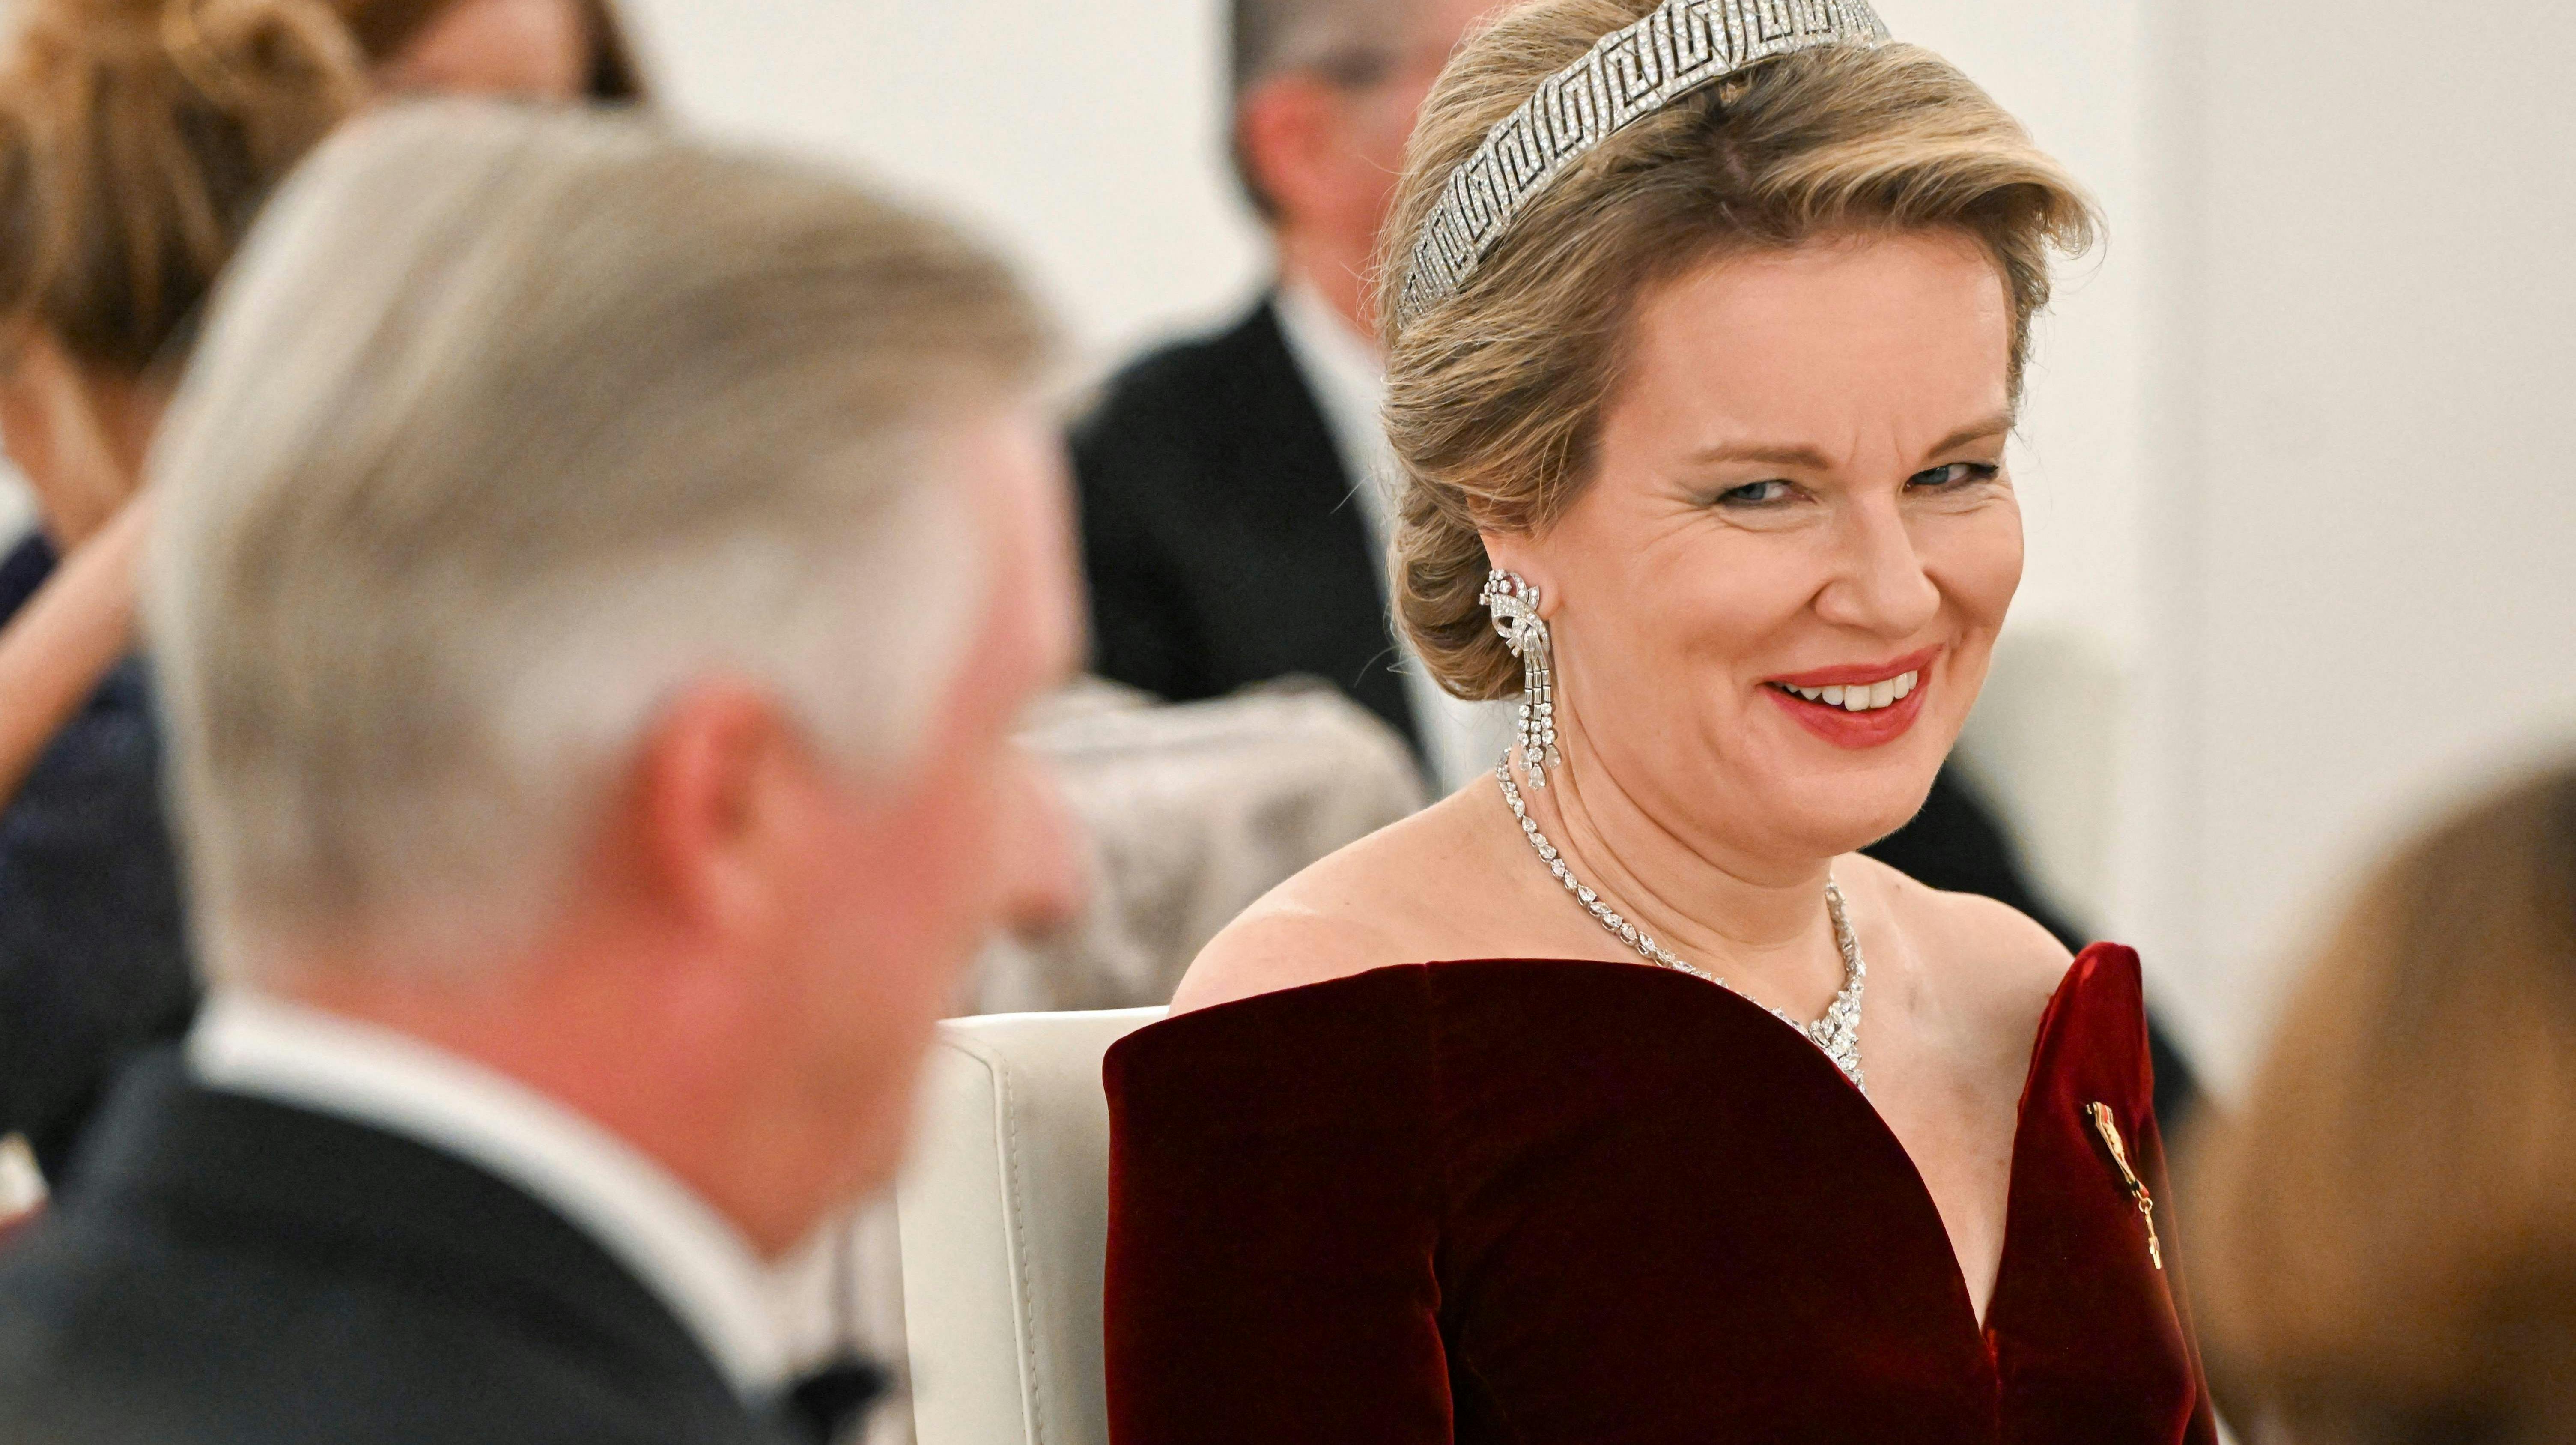 King Philippe – Filip of Belgium (L) and Queen Mathilde of Belgium are pictured during a state banquet at the presidential Bellevue Palace in Berlin, on December 5, 2023. (Photo by Jens Kalaene / POOL / AFP)